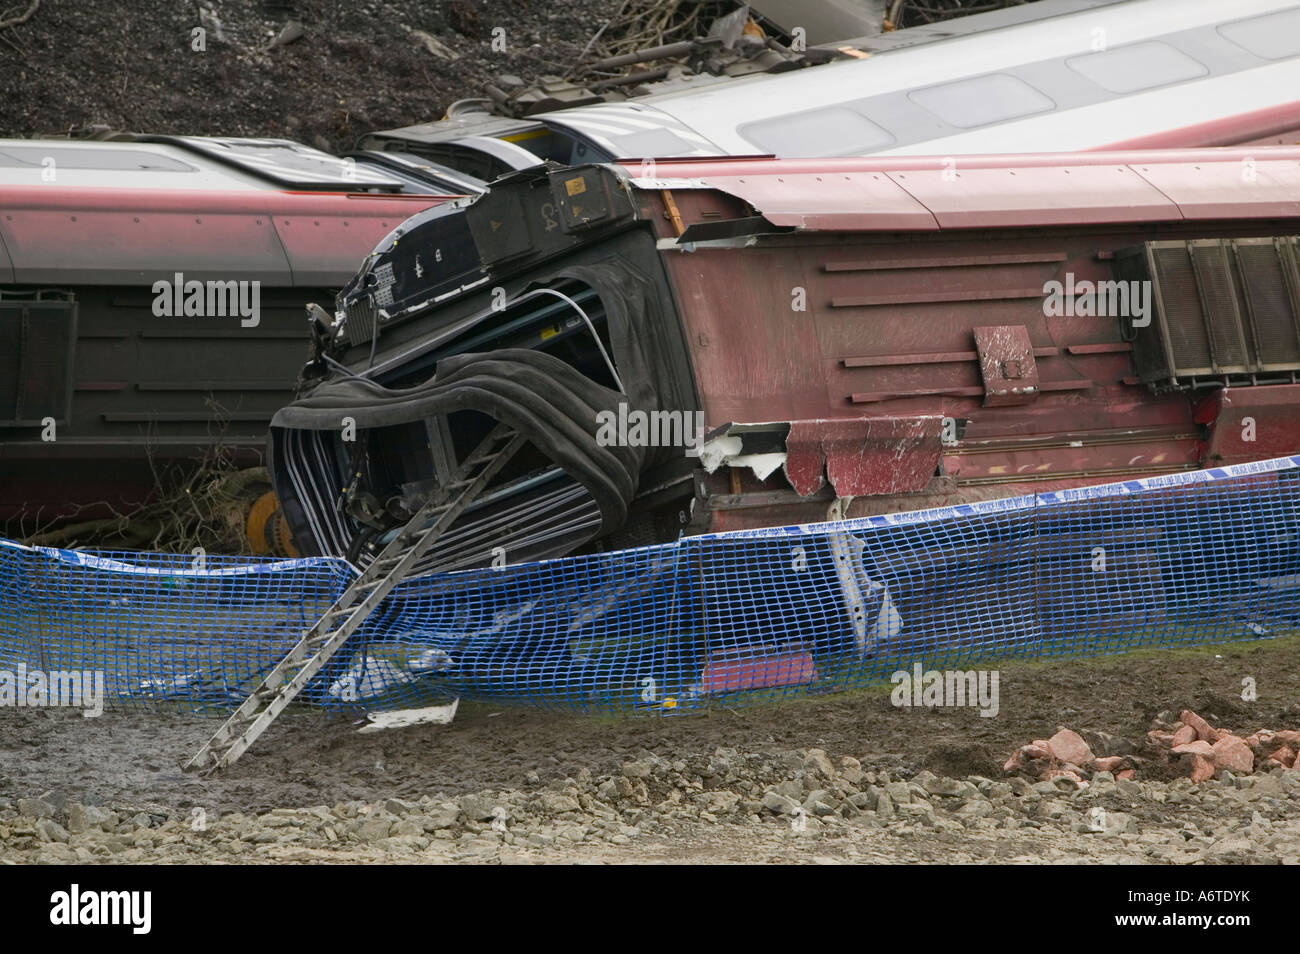 The Virgin train crash at Grayrigg, Kendal, Cumbria, UK, caused by faulty track maintenance Stock Photo